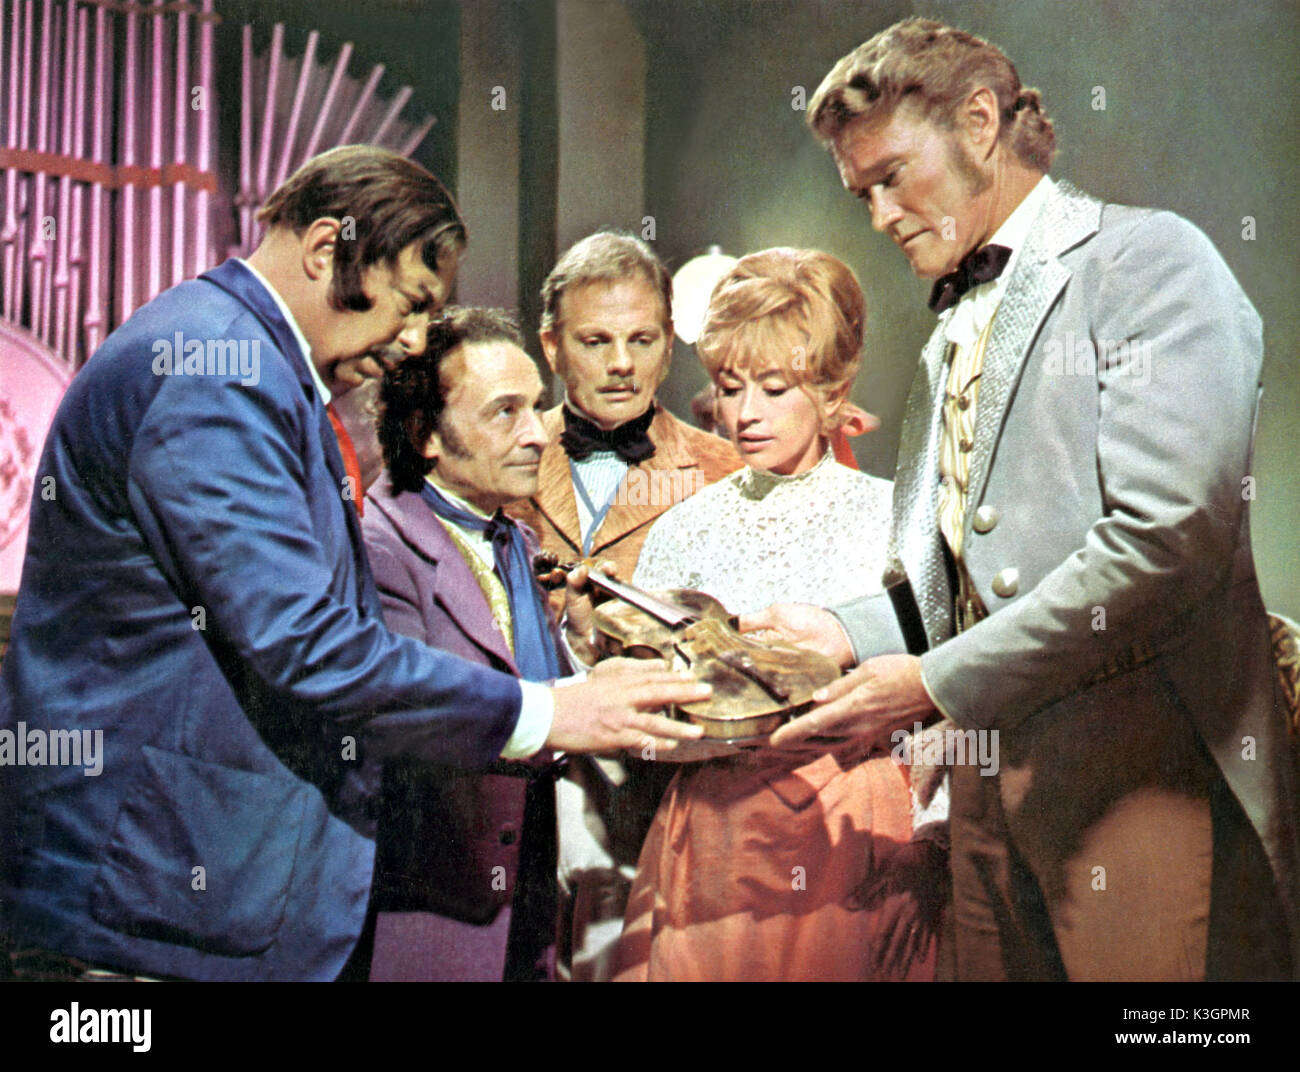 CAPTAIN NEMO AND THE UNDERWATER CITY BILL FRASER, KENNETH CONNOR, ALLAN CUTHBERTSON, NANETTE NEWMAN, CHUCK CONNORS Stock Photo